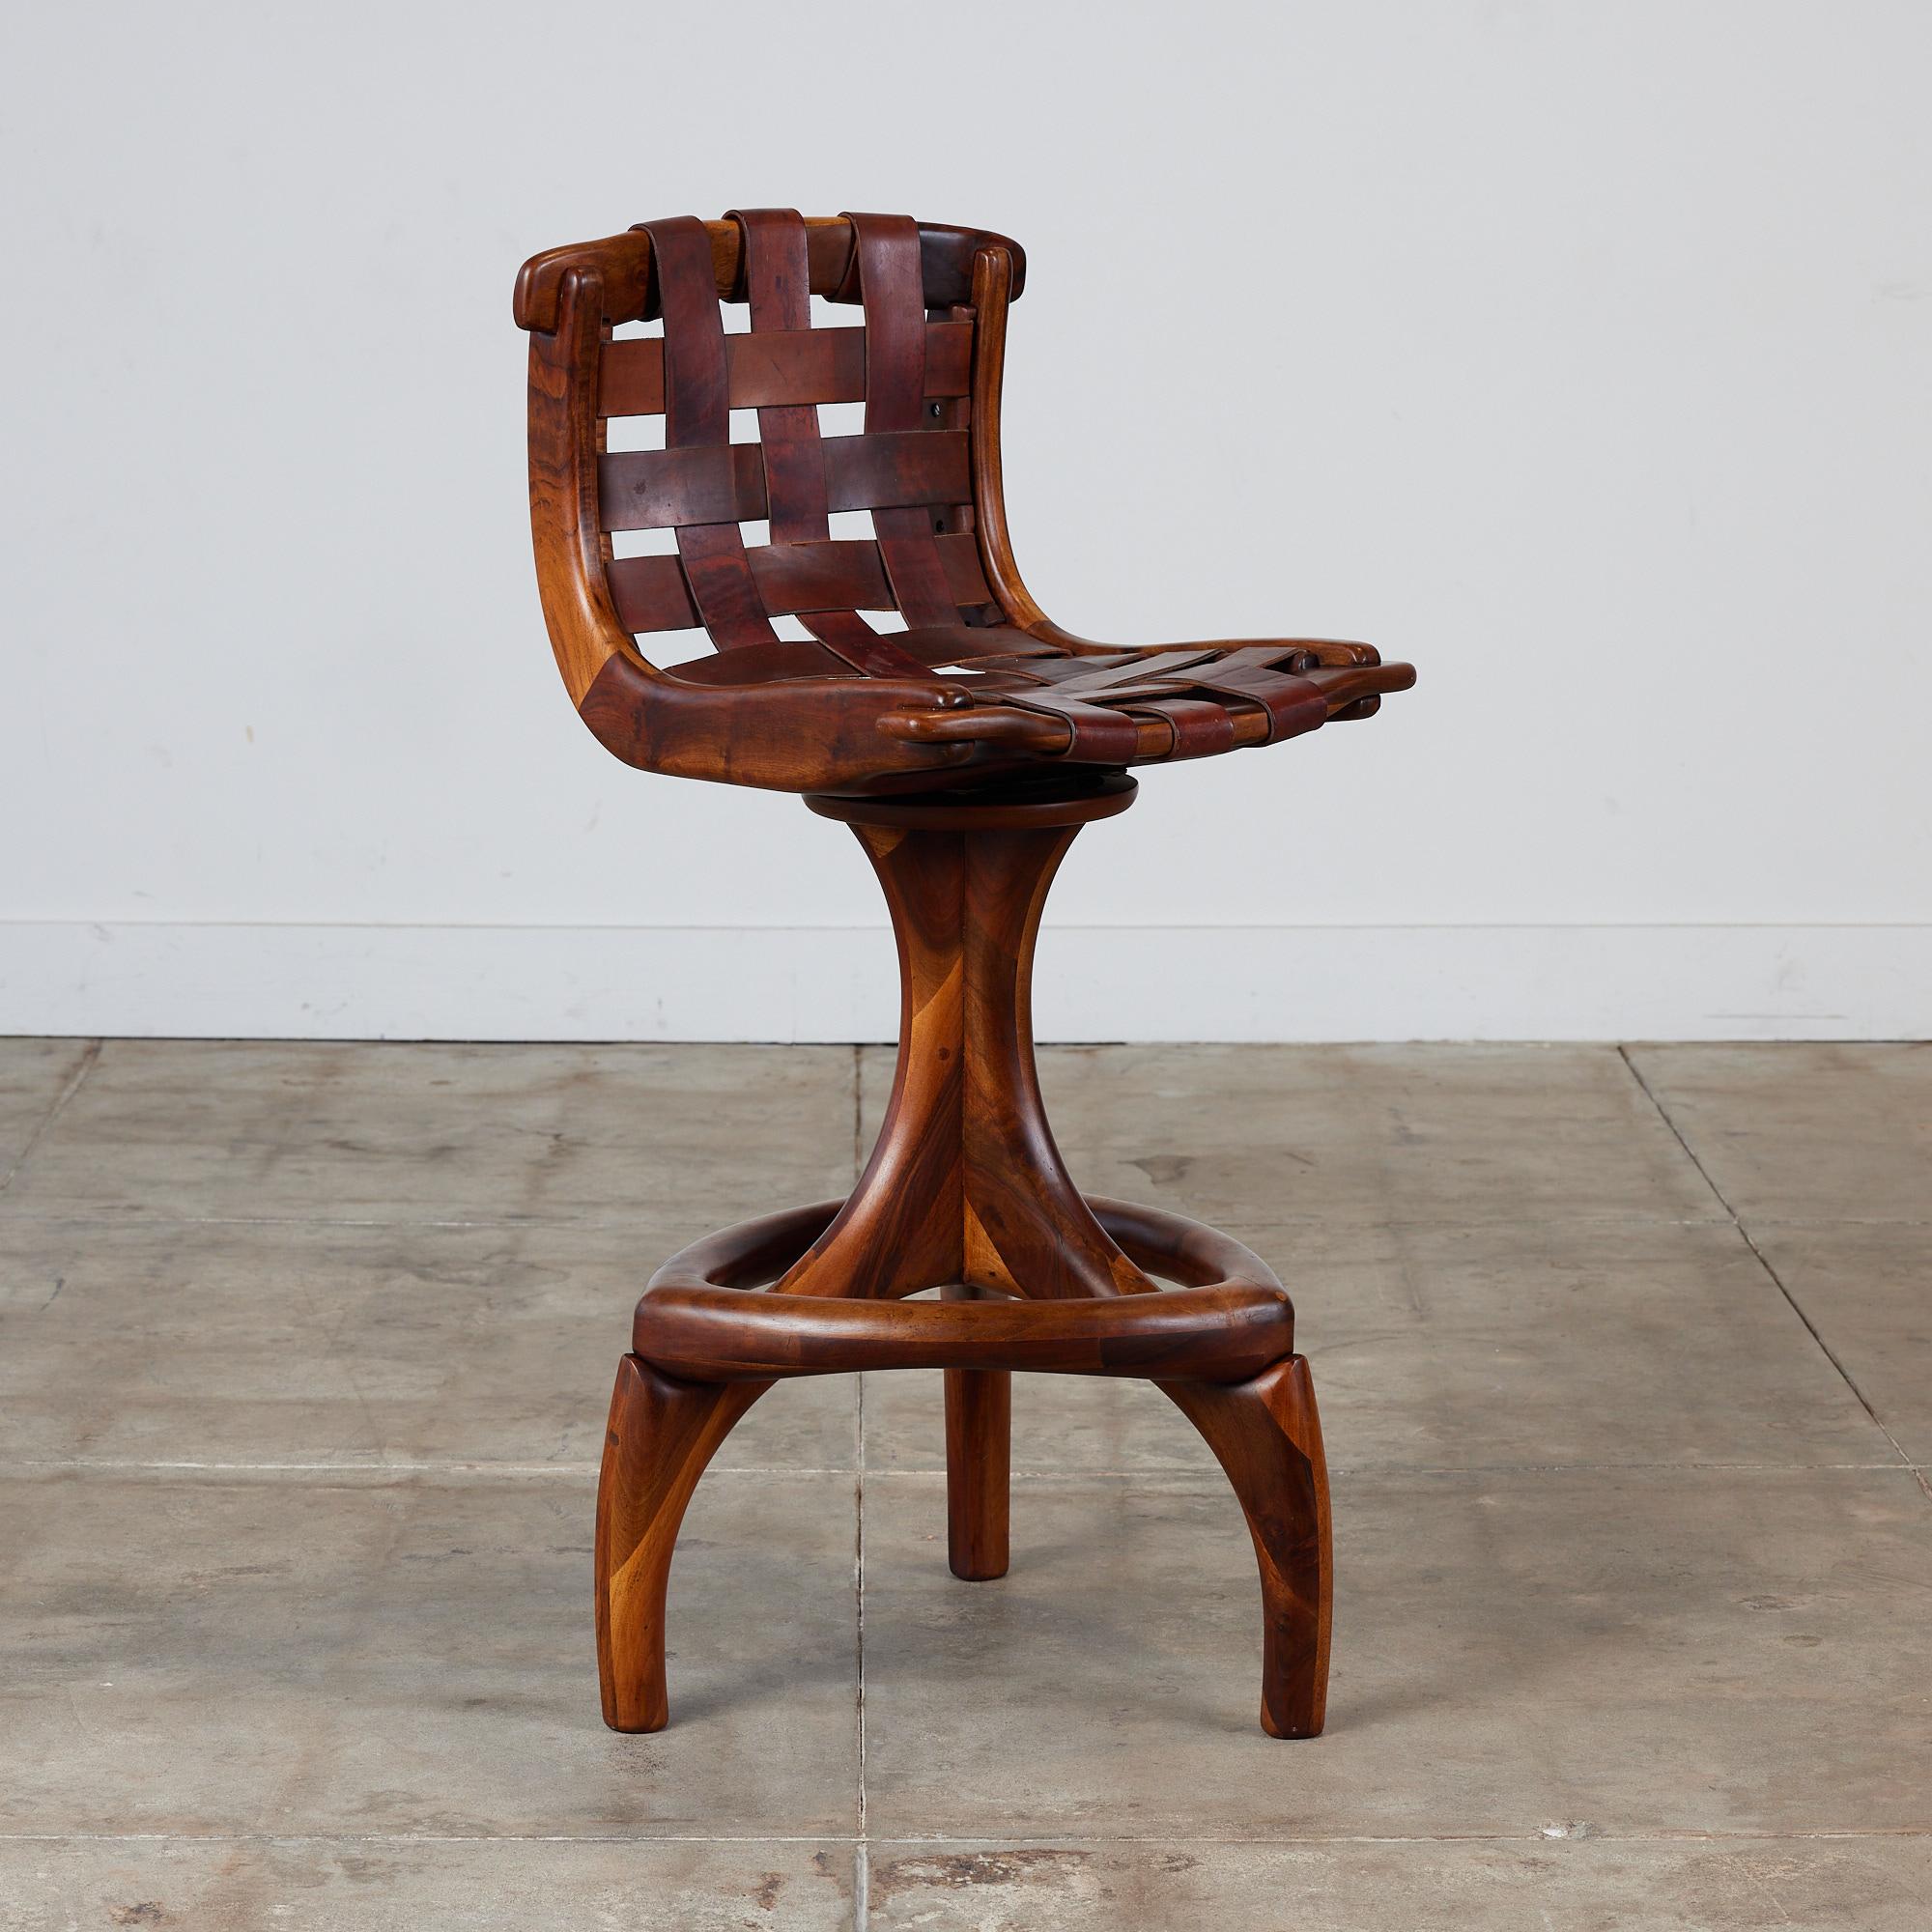 Walnut studio craft swivel stool by California designer, Arthur Espenet Carpenter, circa 1970s. The stool features a woven leather slung seat with sculpted wood L-shape frame. The stool has a 360 degree swivel mechanism and is supported by three